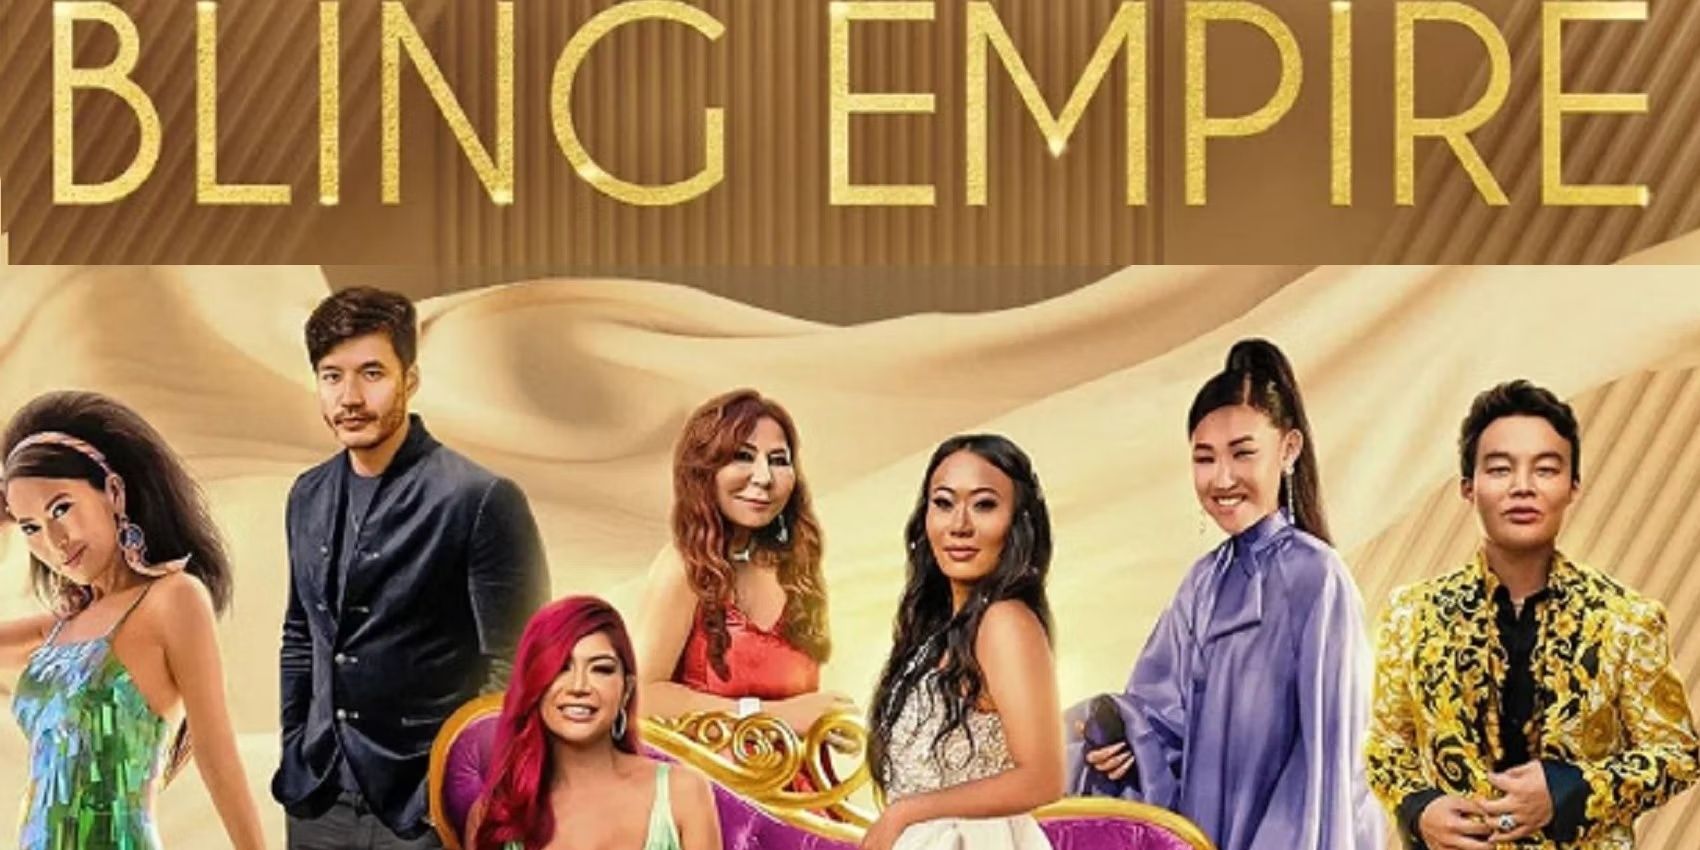 Bling Empire Cast group shot with logo